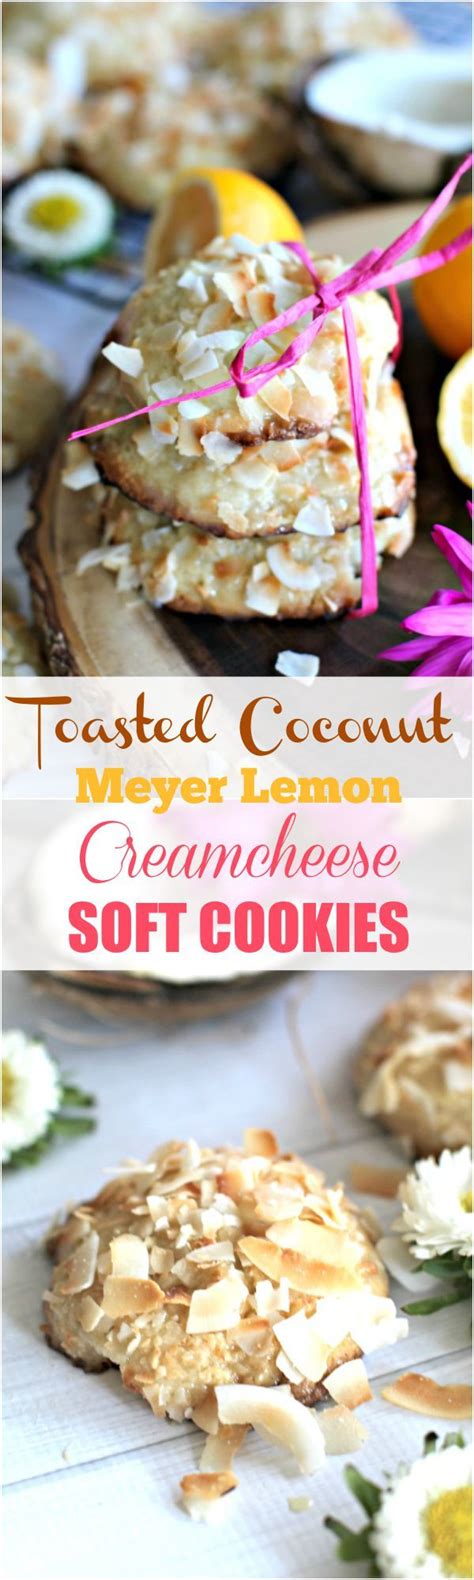 The lime zest, coconut oil, and white chocolate chips all work so well together. Cheesecake Coconut Cookies | Recipe | Dessert recipes ...